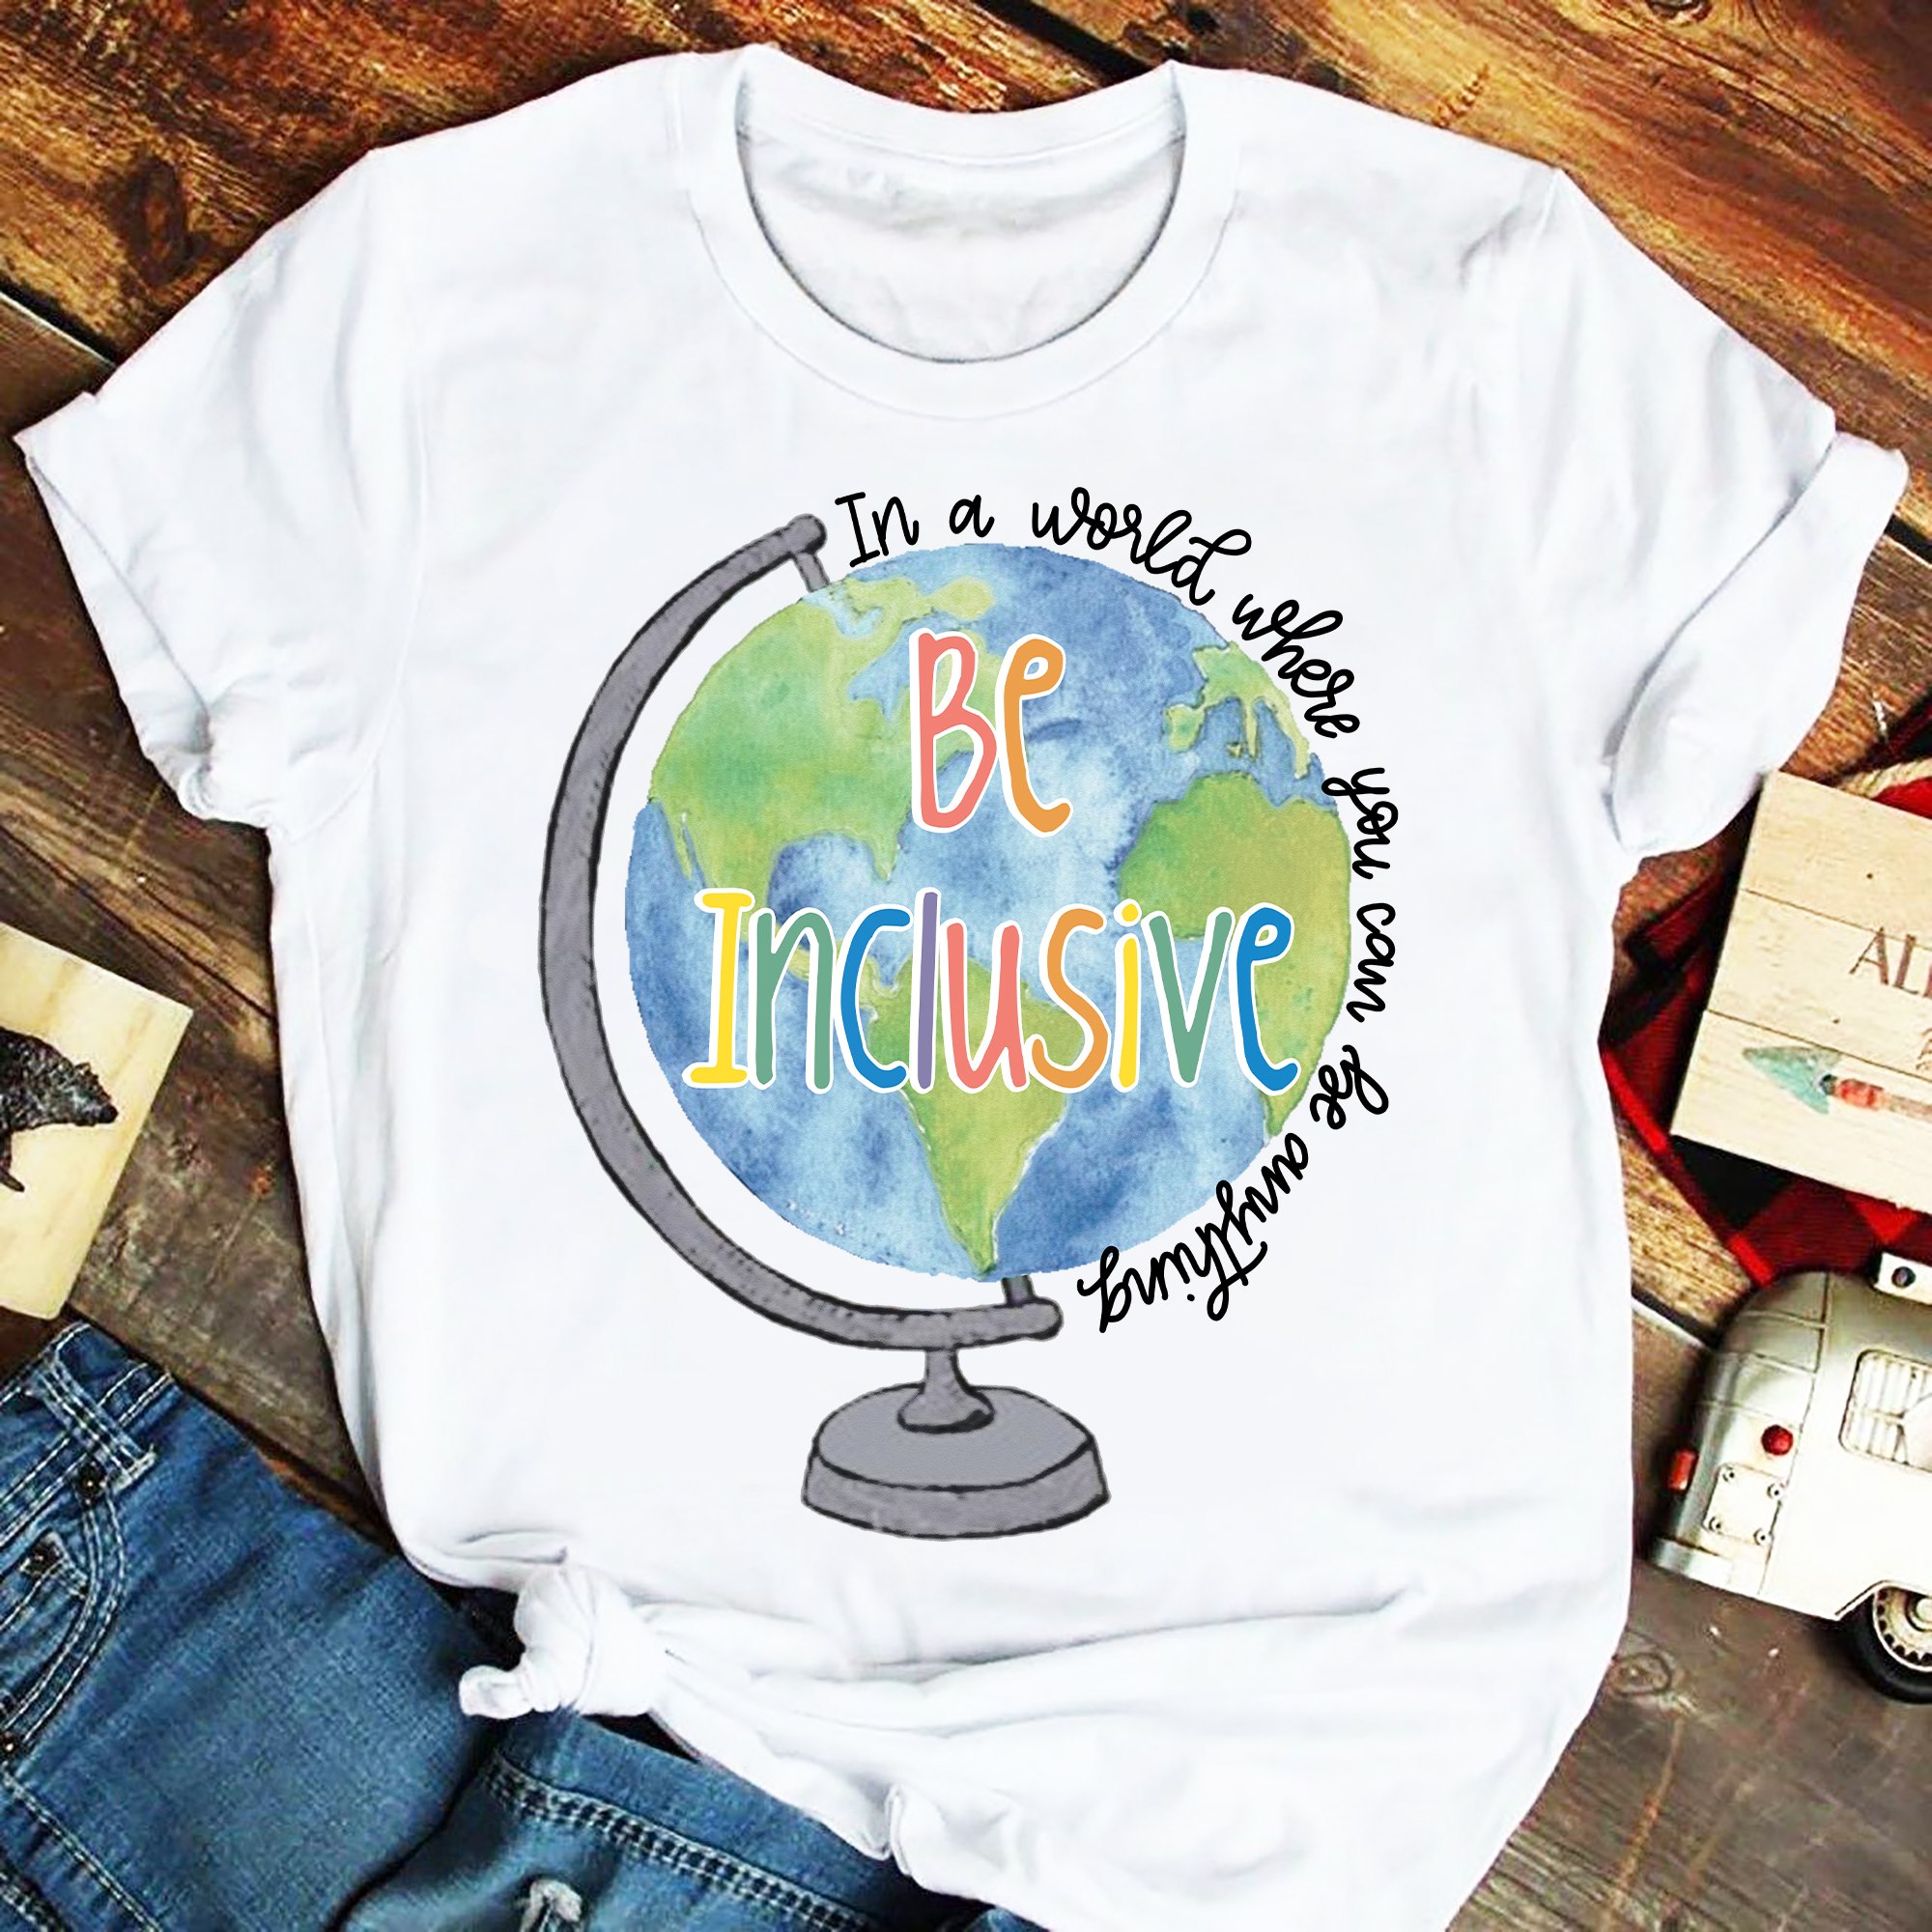 In a world where you can be anything be inclusive - The earth